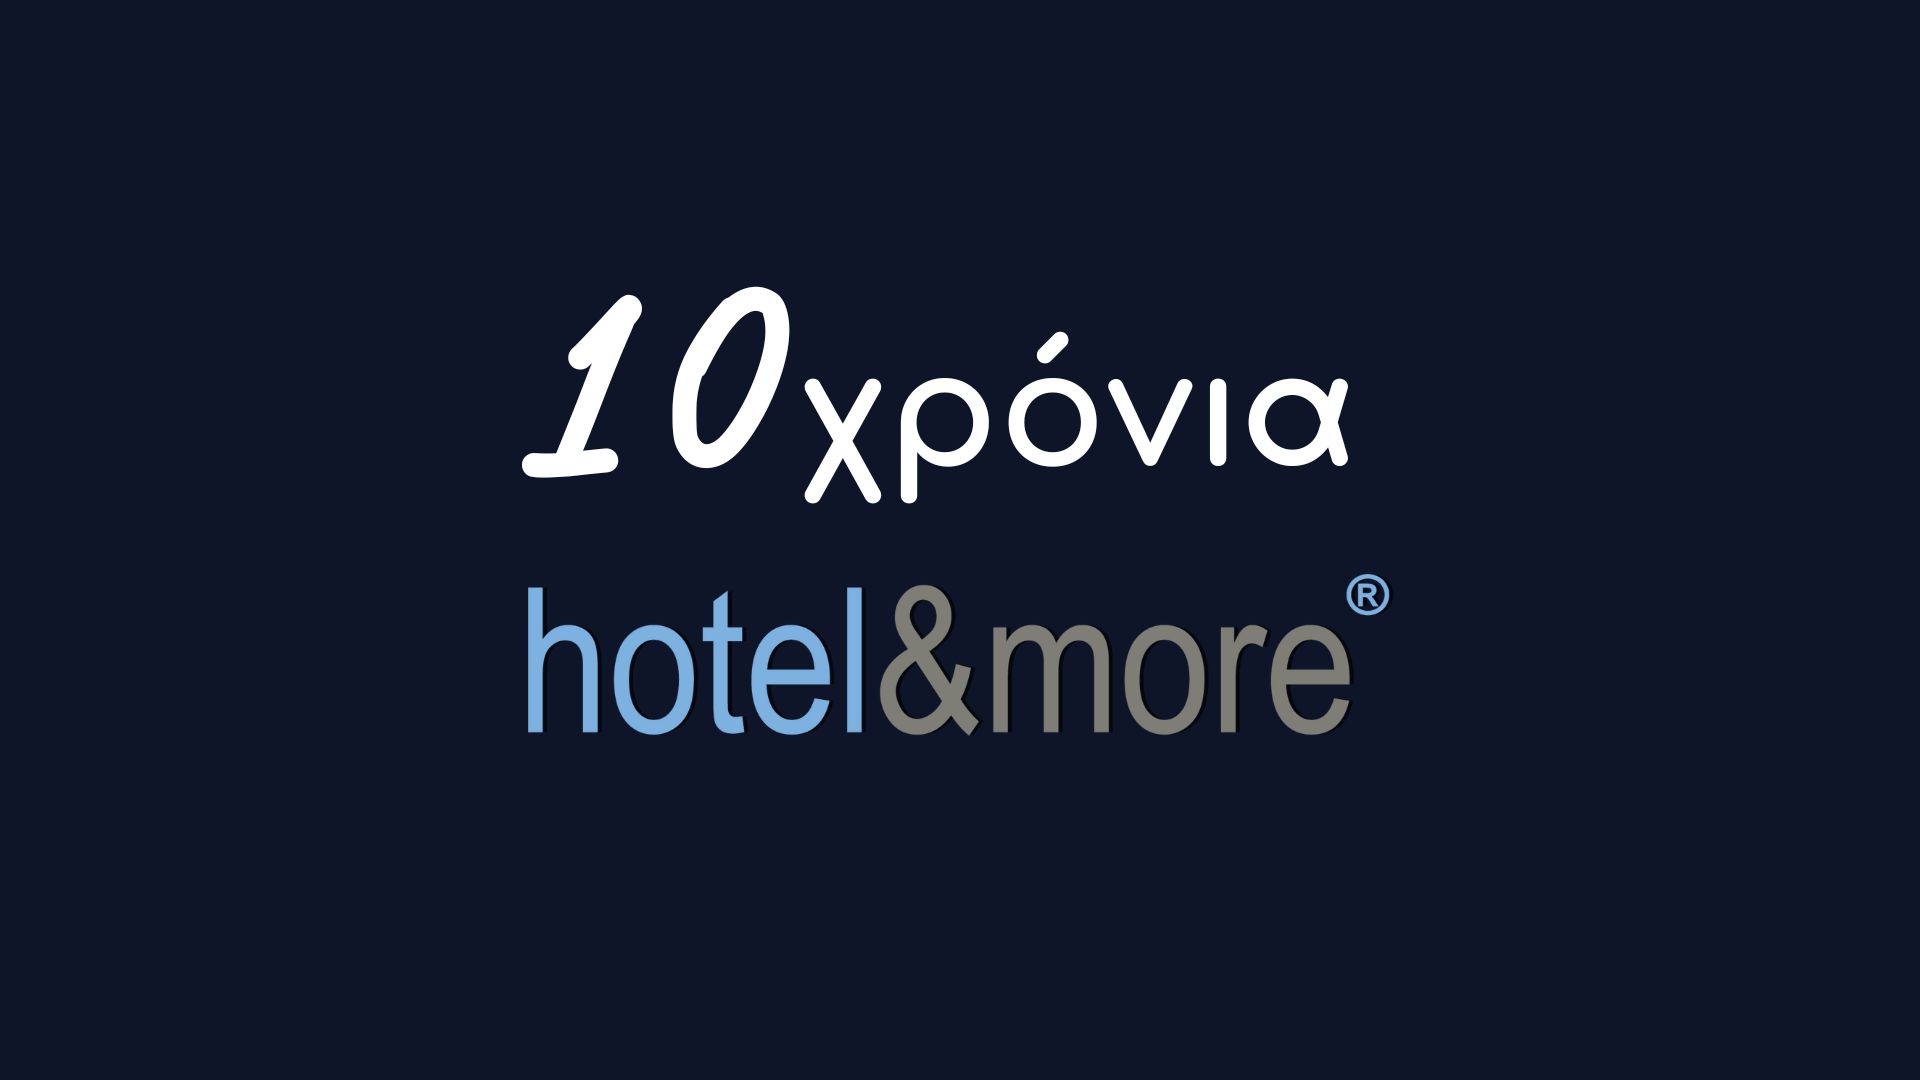 10 years hotel&more